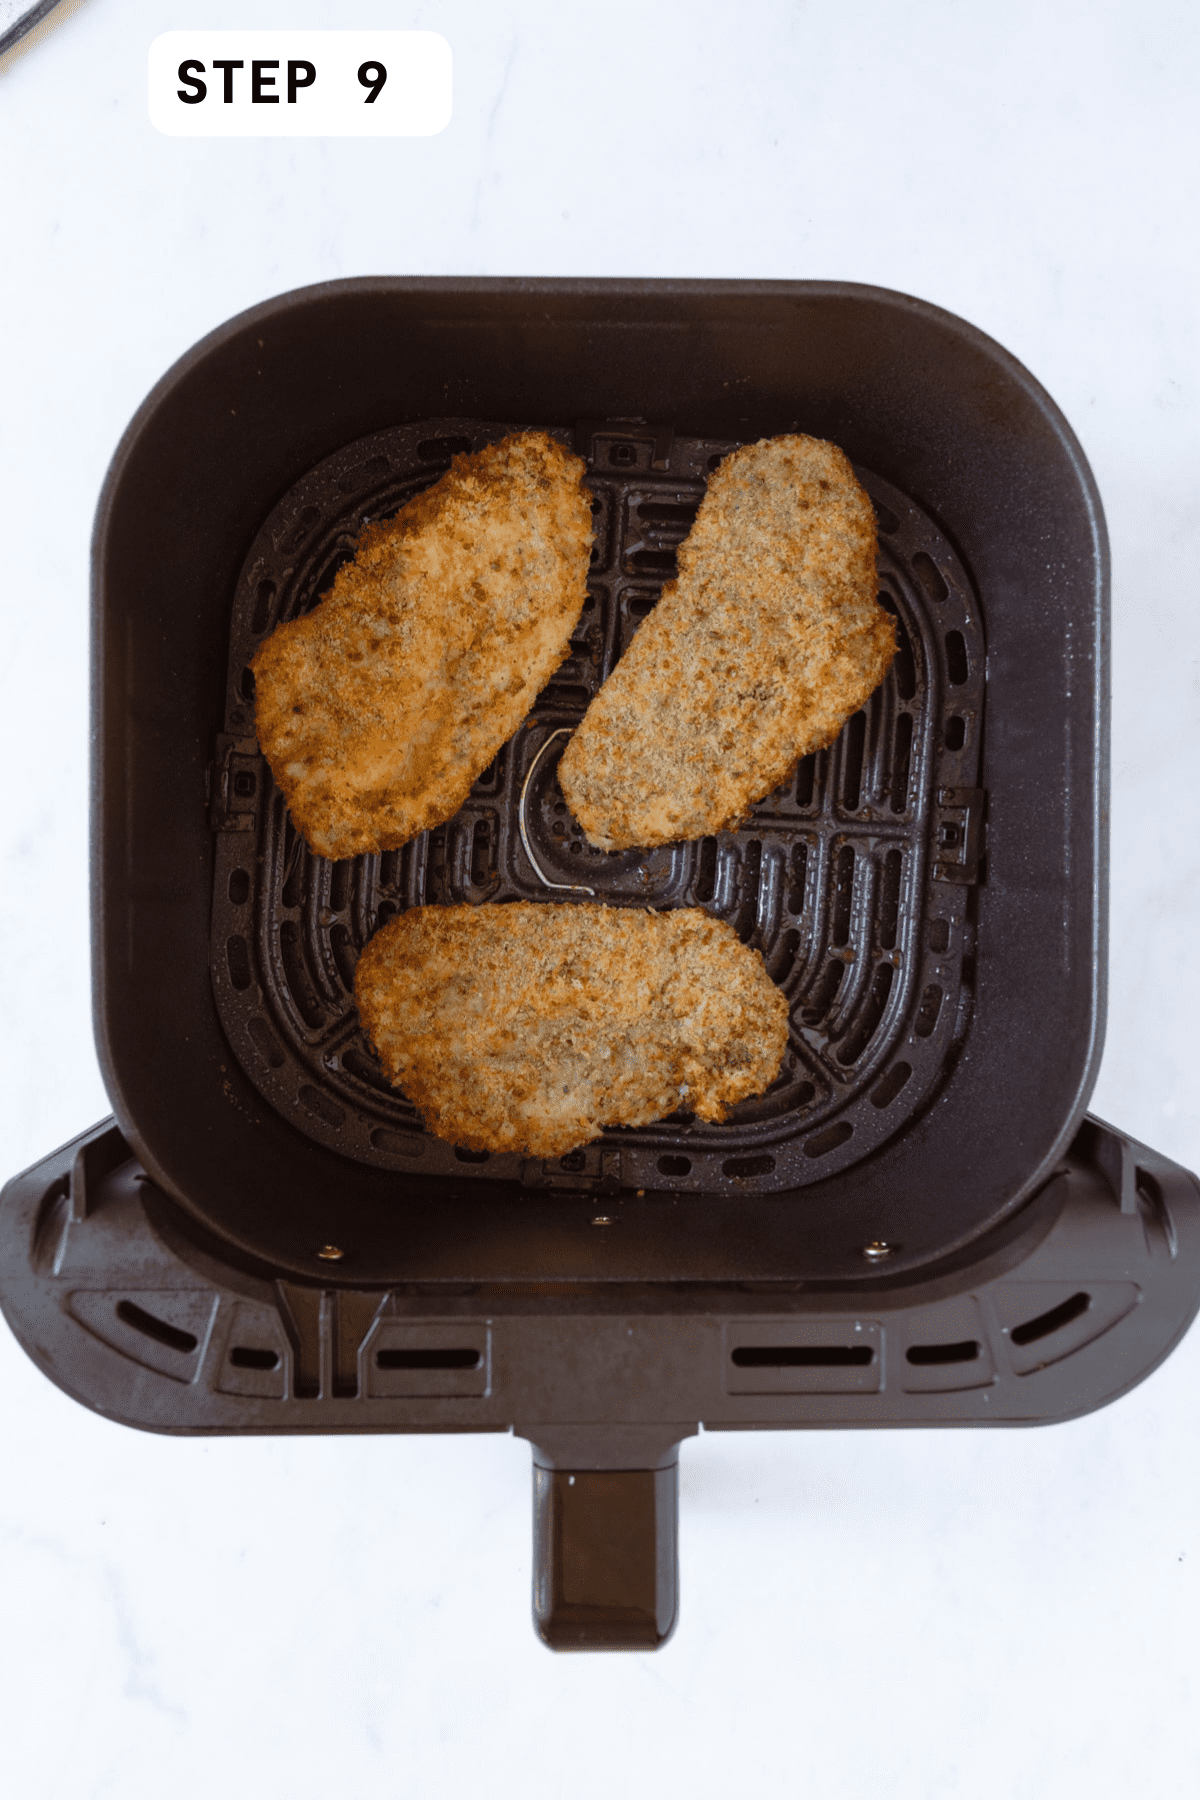 3 cooked chicken cutlets in an air fryer basket. 